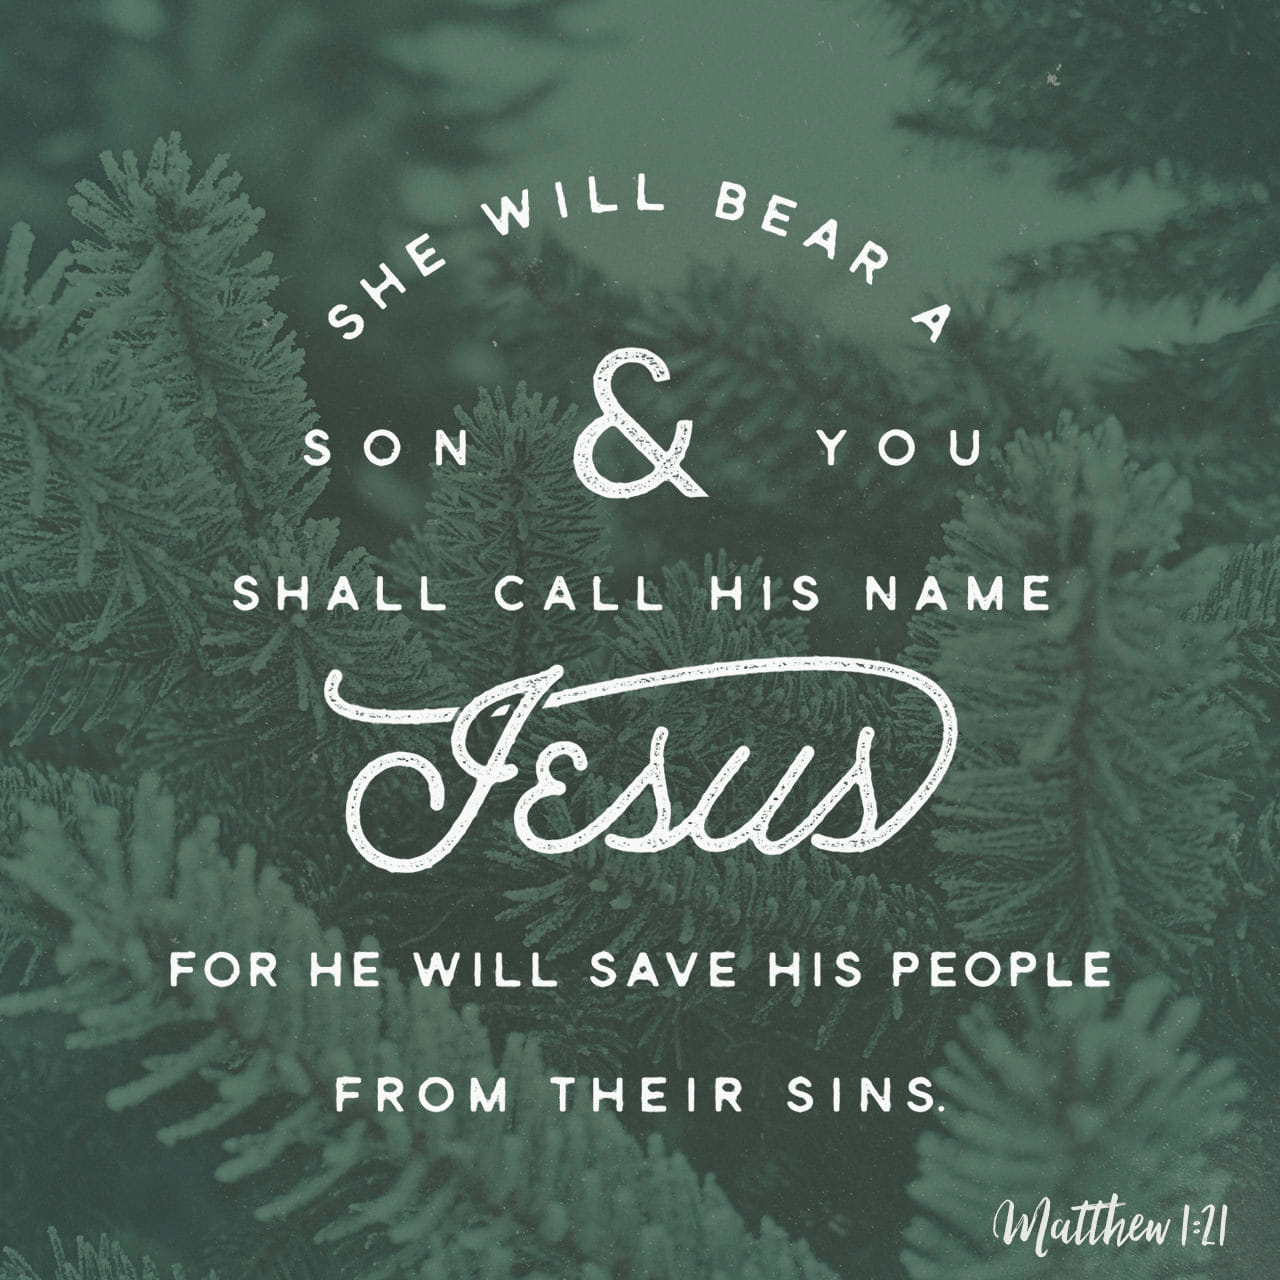 “She will bear a Son; and you shall call His name Jesus, for He will save His people from their sins.””
‭‭Matthew‬ ‭1:21‬ ‭NASB‬‬